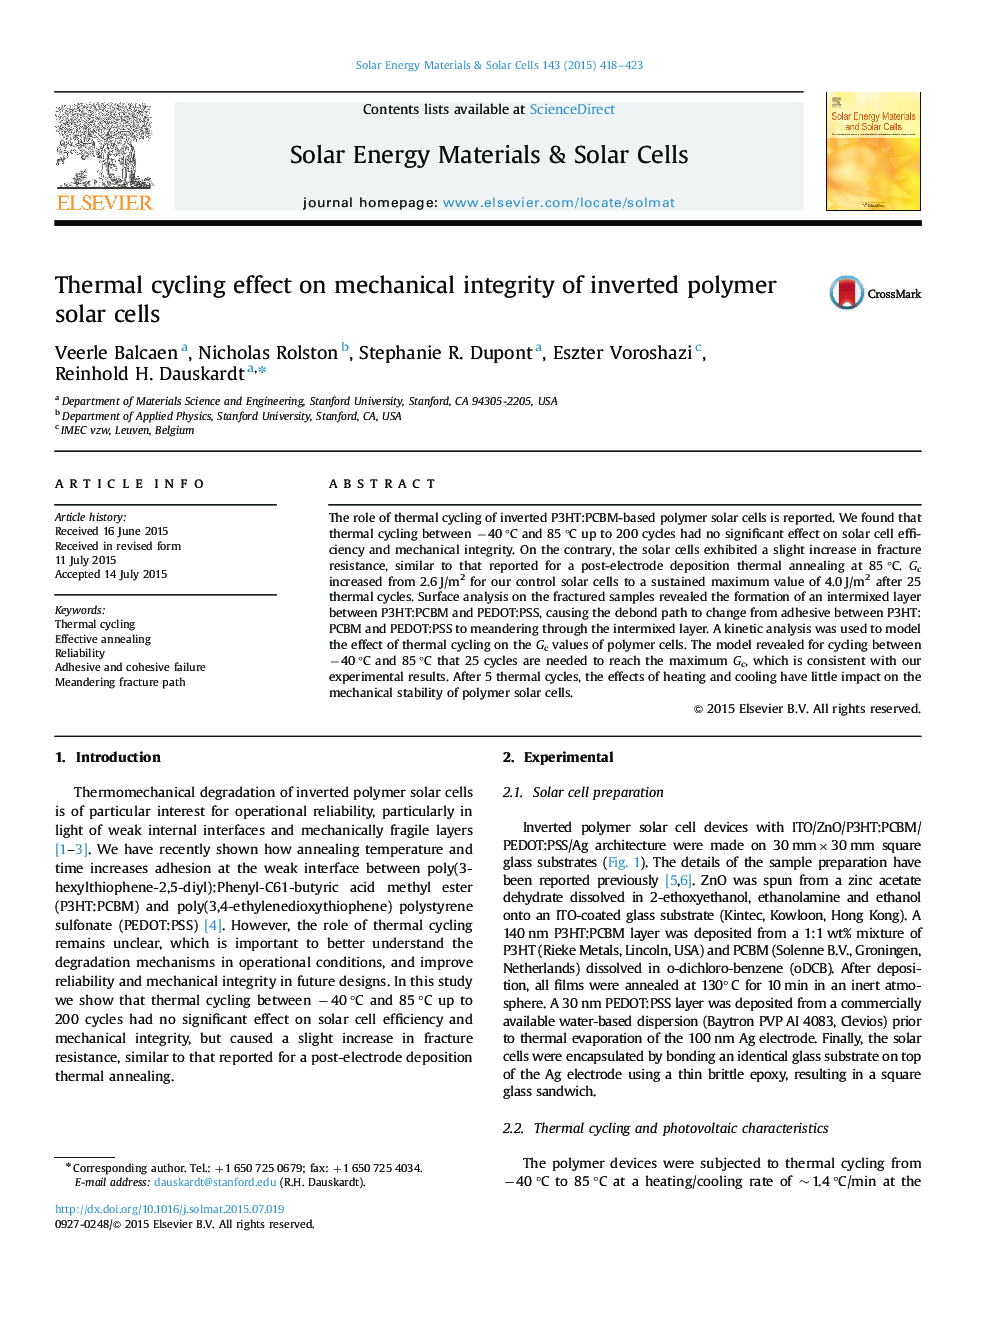 Thermal cycling effect on mechanical integrity of inverted polymer solar cells